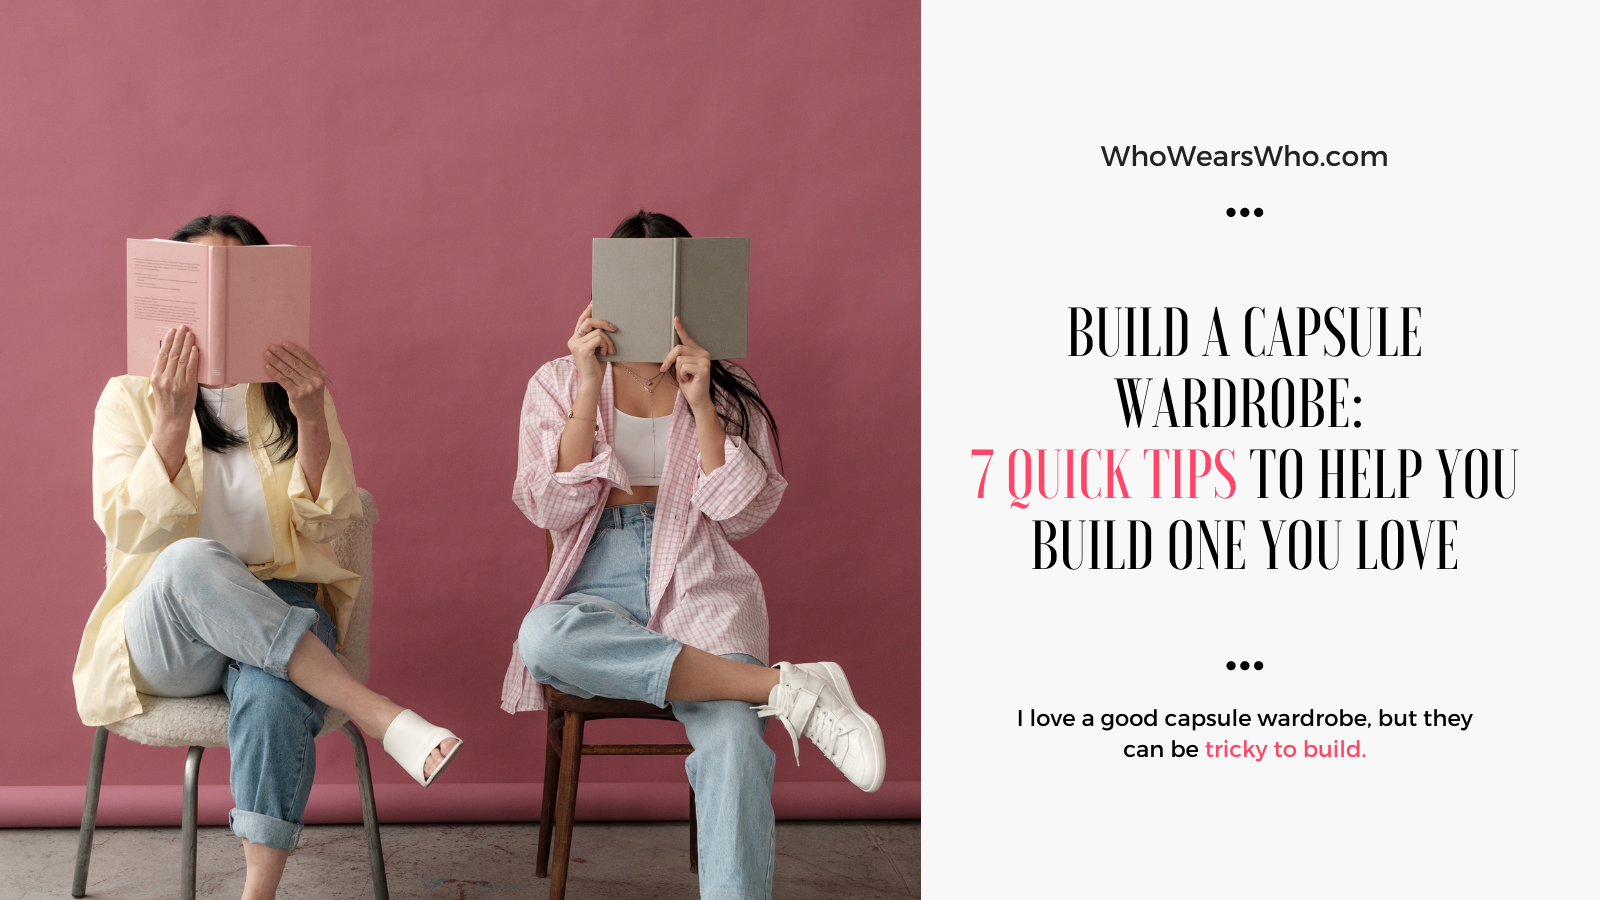 Build a Capsule Wardrobe 7 quick tips to help you build one you love Twitter